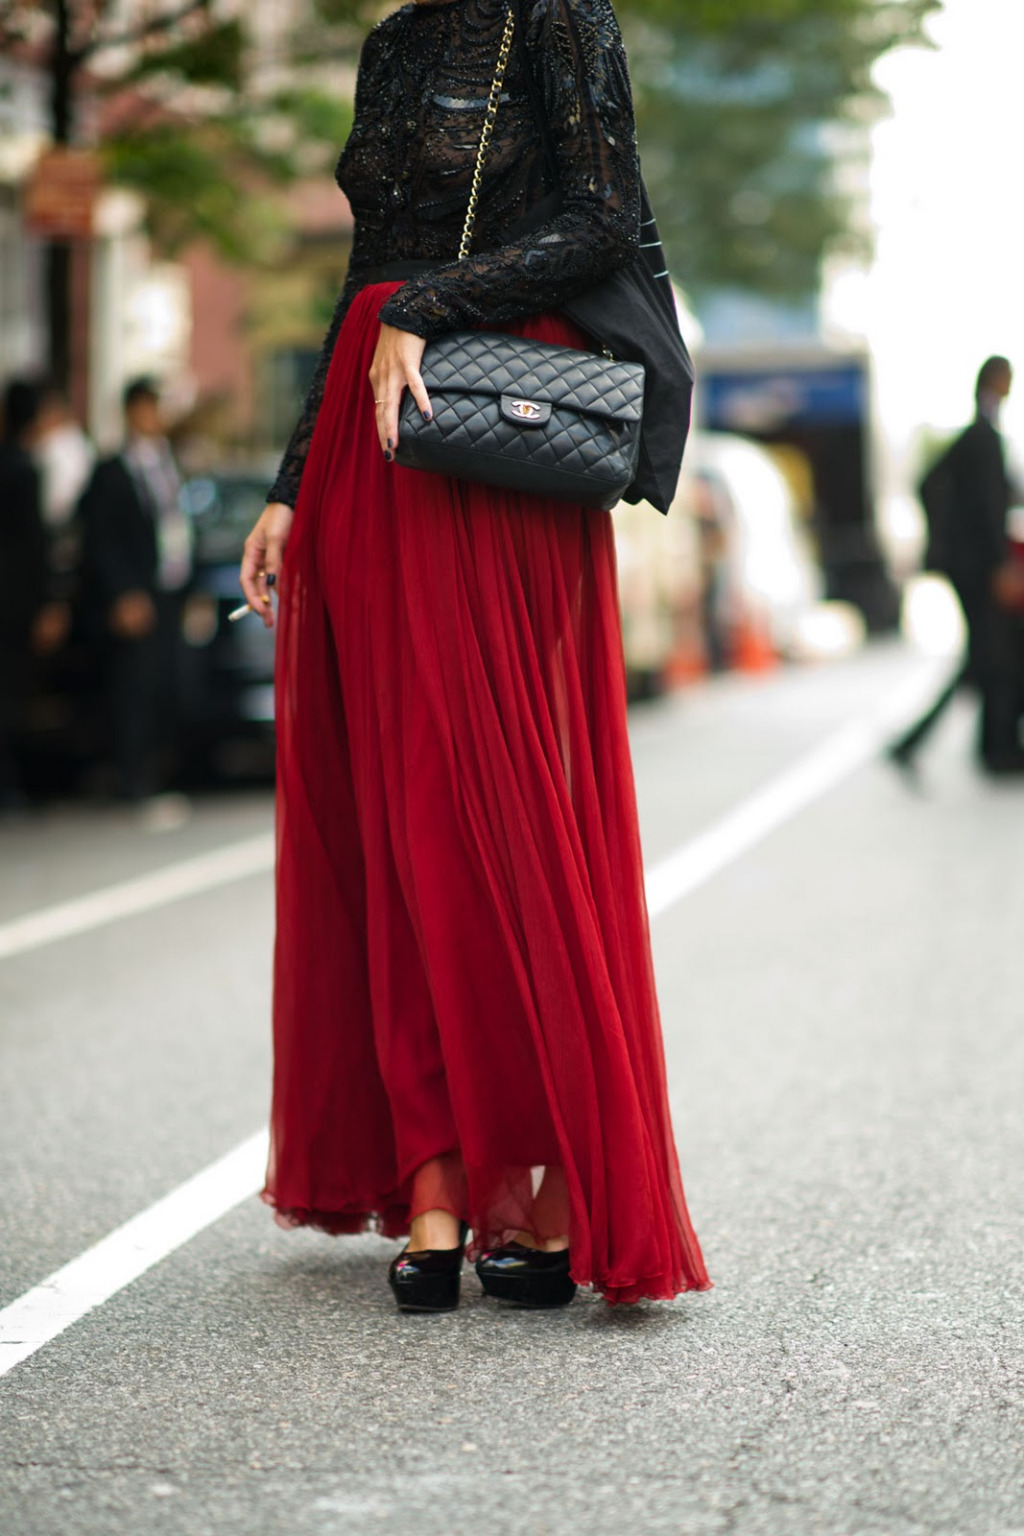 MAXI Skirts: The Trend That Never Dies? – The Fashion Tag Blog